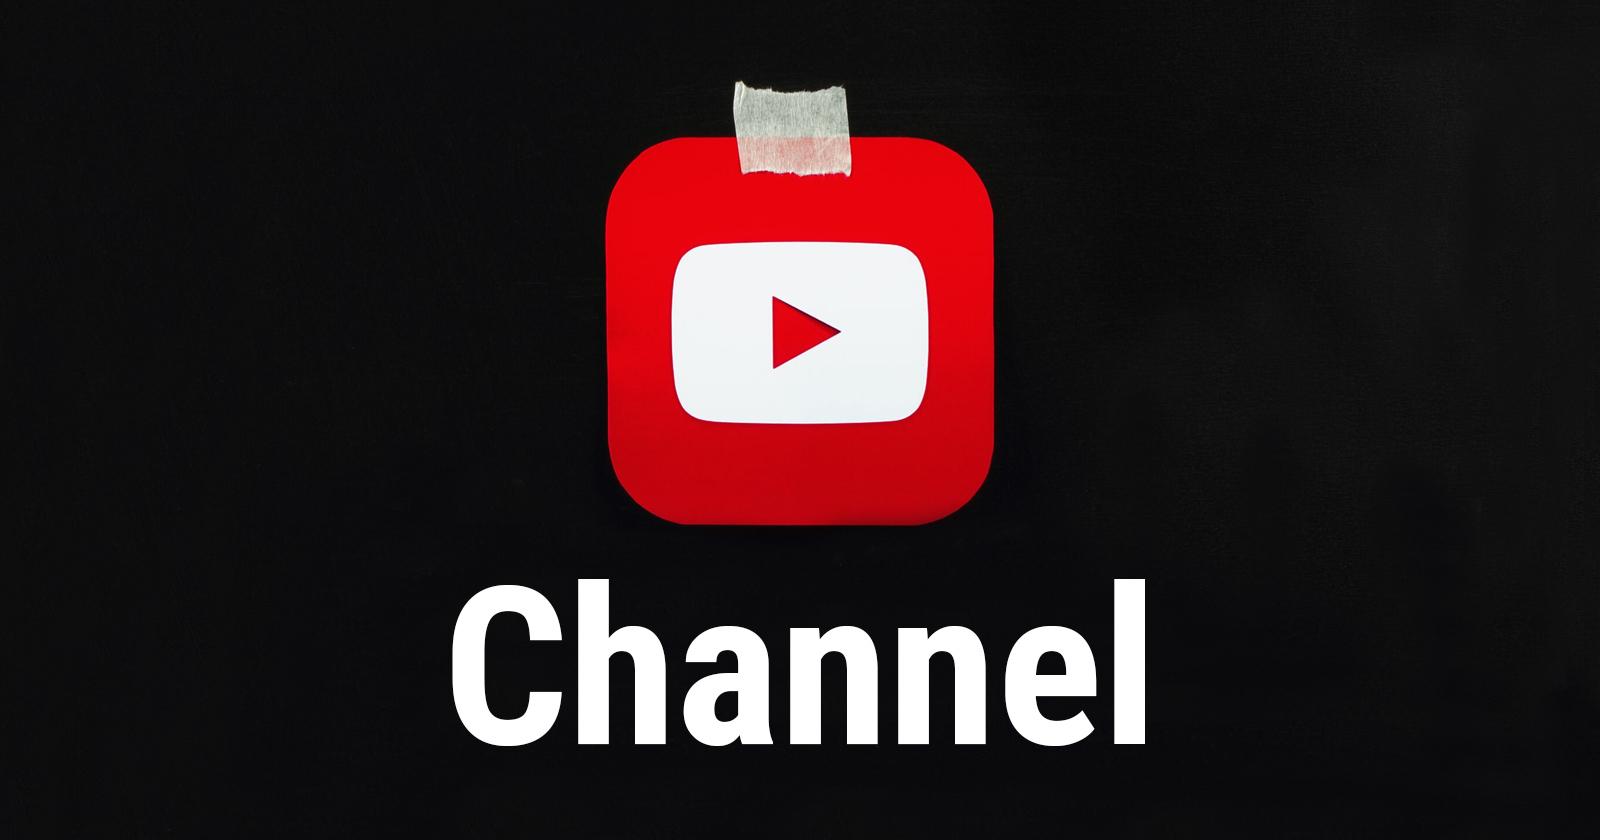 50+  Channel Name Ideas 